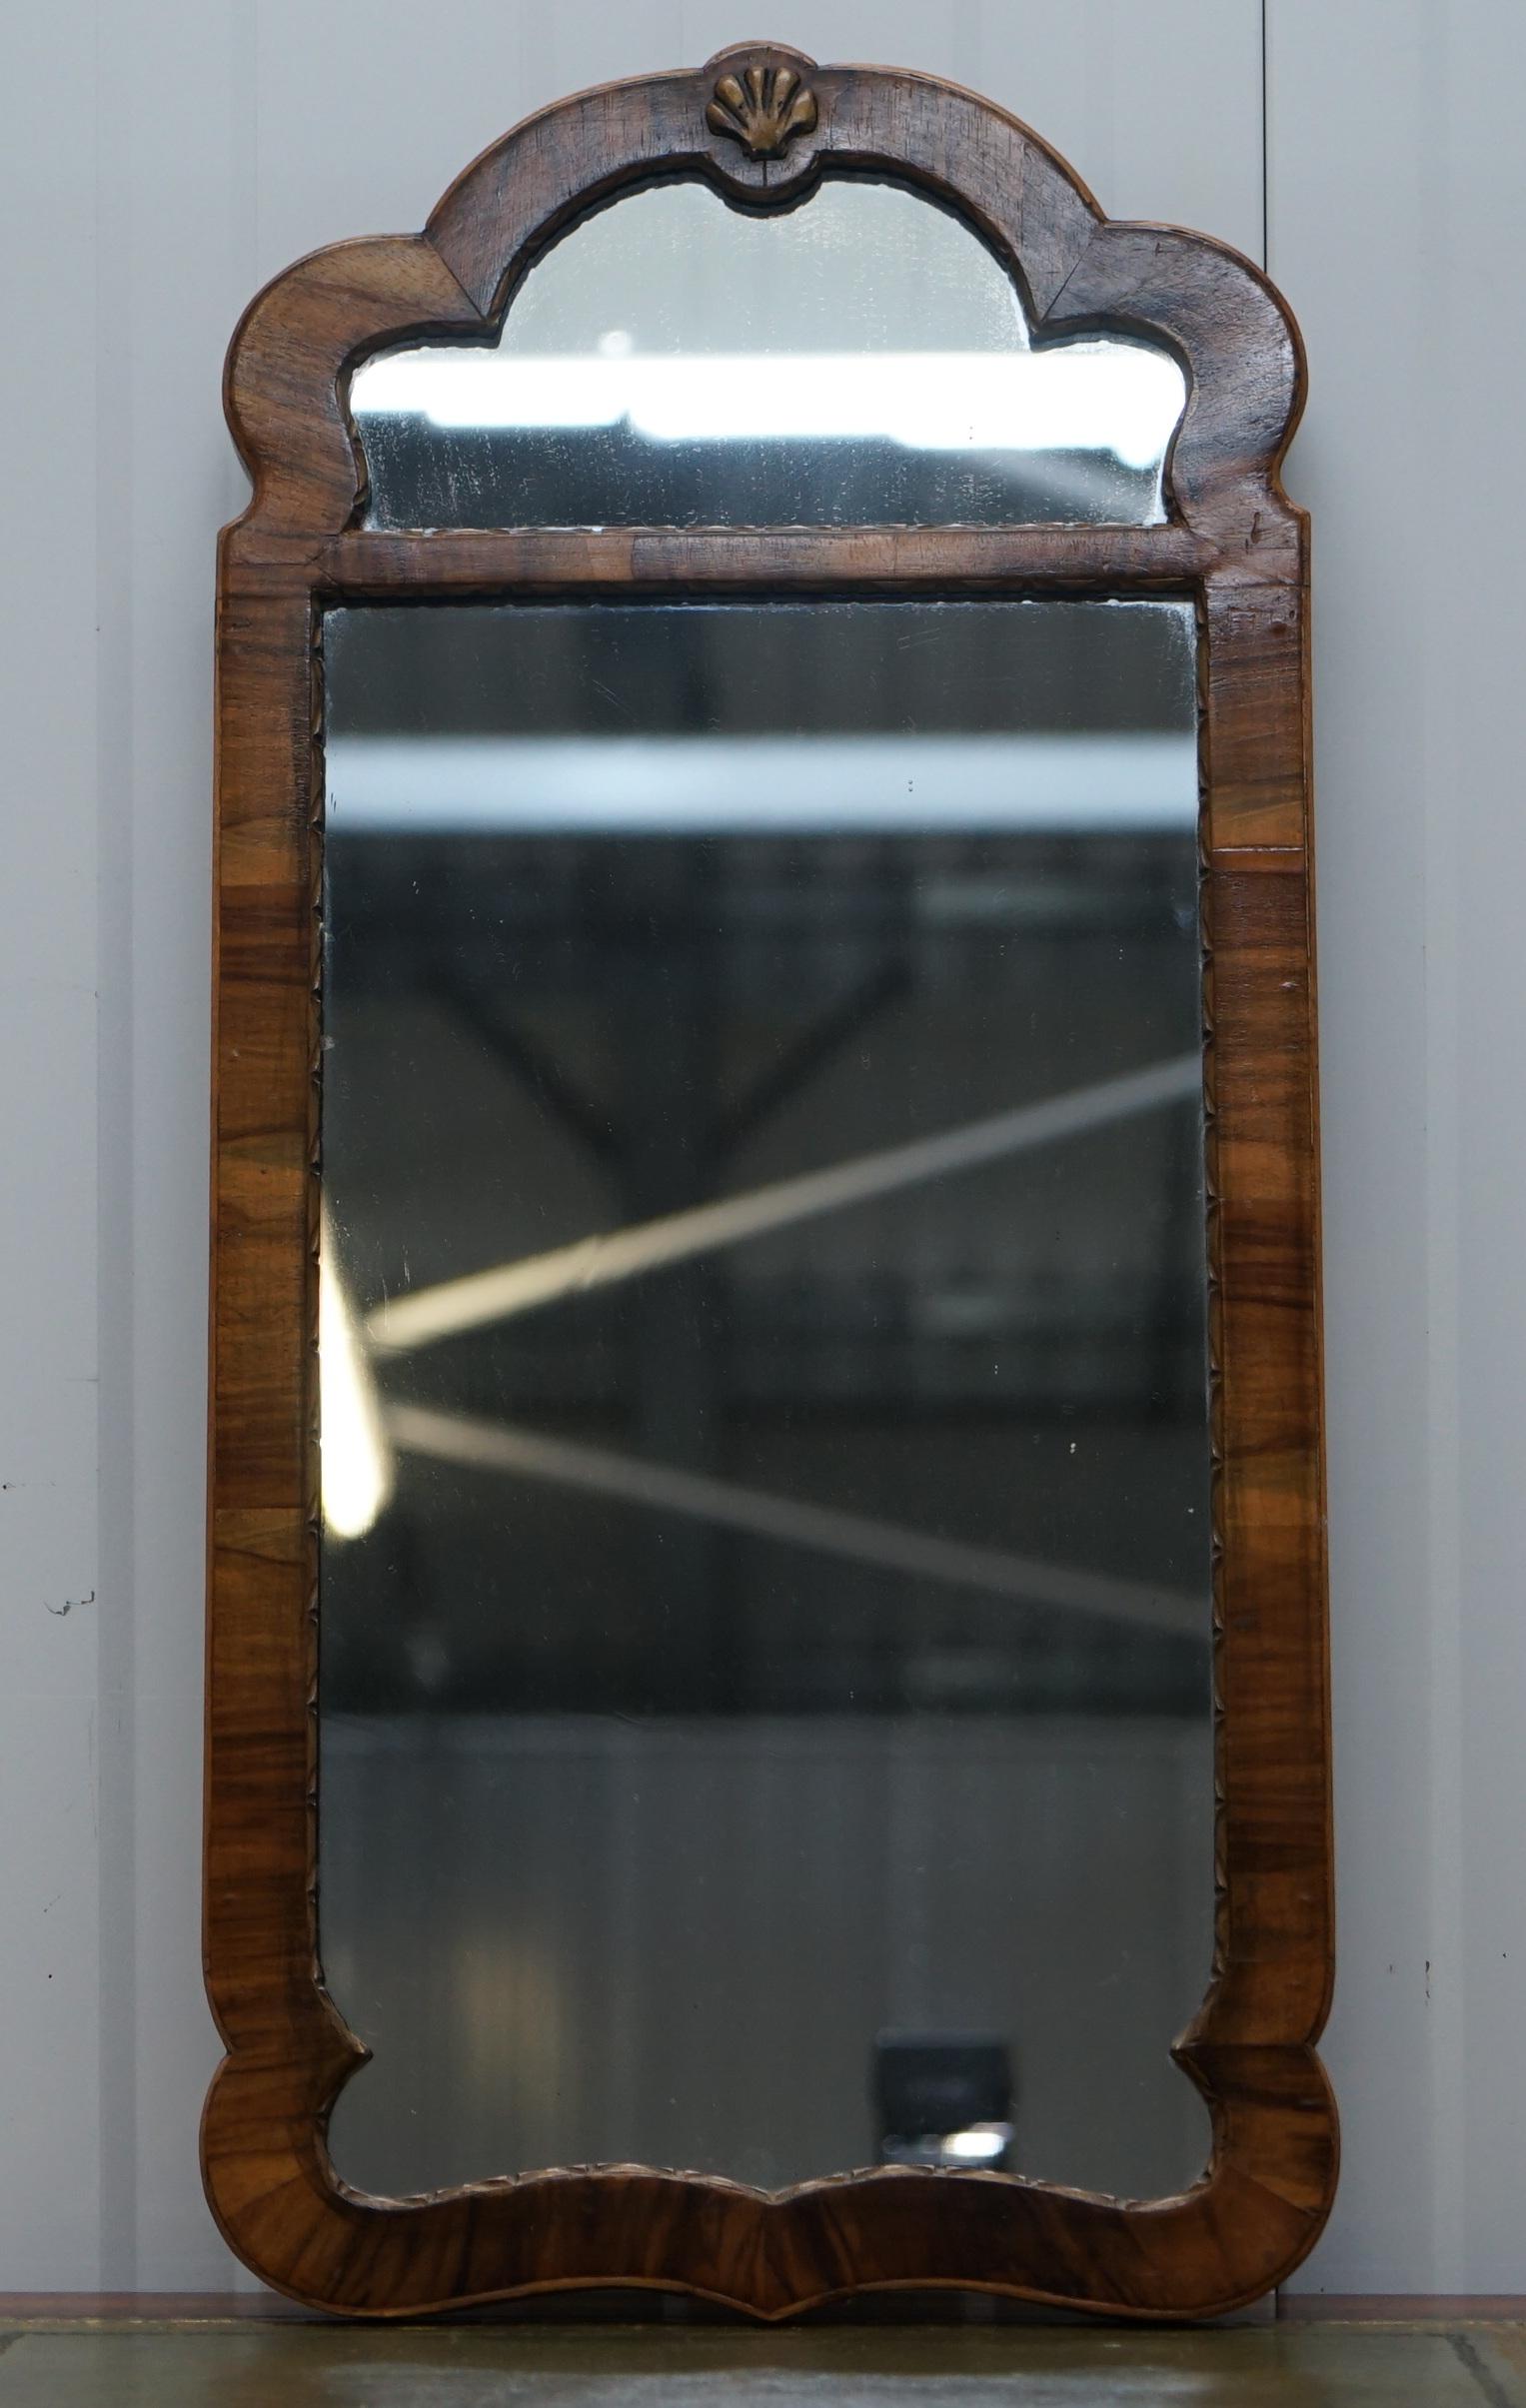 We are delighted to offer for sale this lovely circa 1800 walnut Georgian mirror circa 1800 with original mercury glass

A good looking and a well made decorative piece of furniture, the mercury plate glass is original and has a lovely warm blue